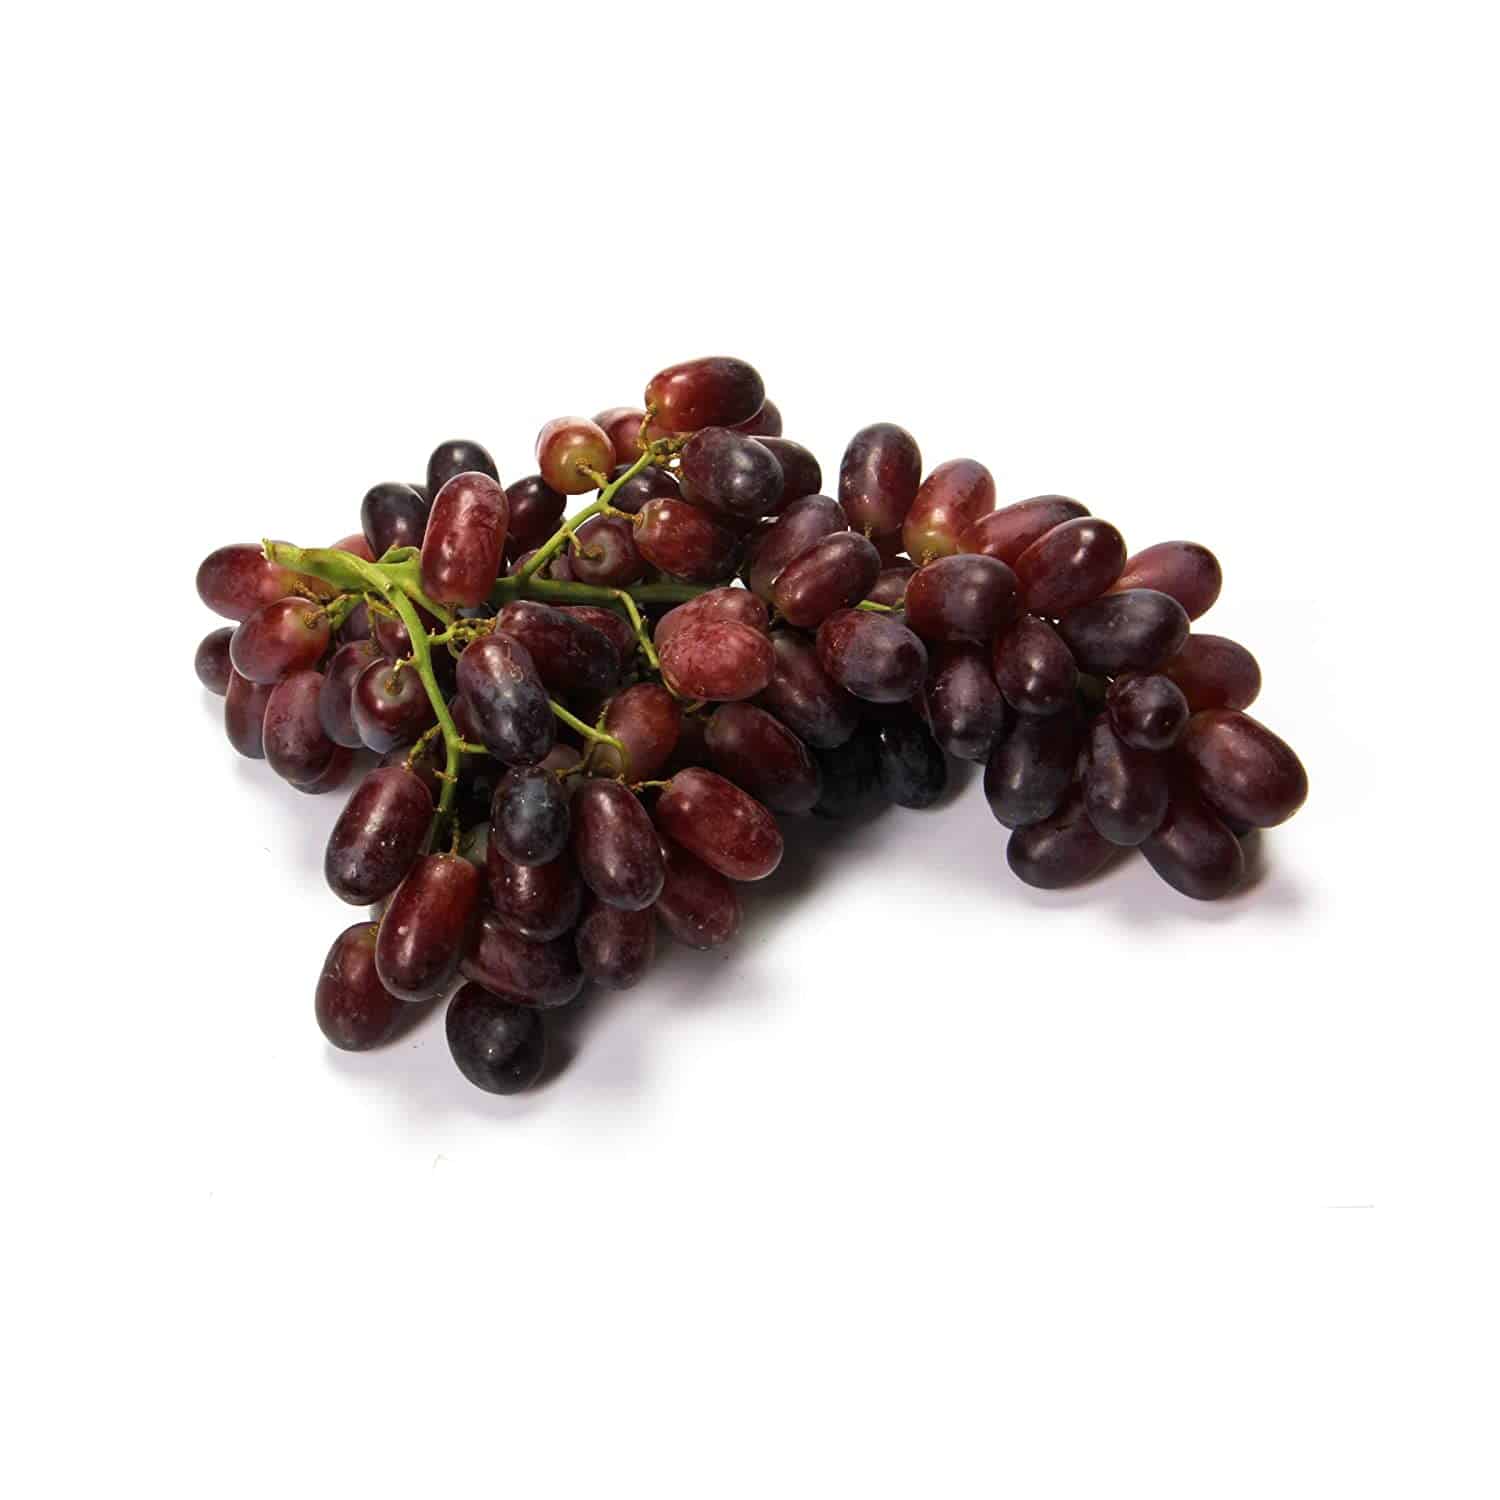 Grape Red Seedless Conventional, 32 Ounce/2lbs